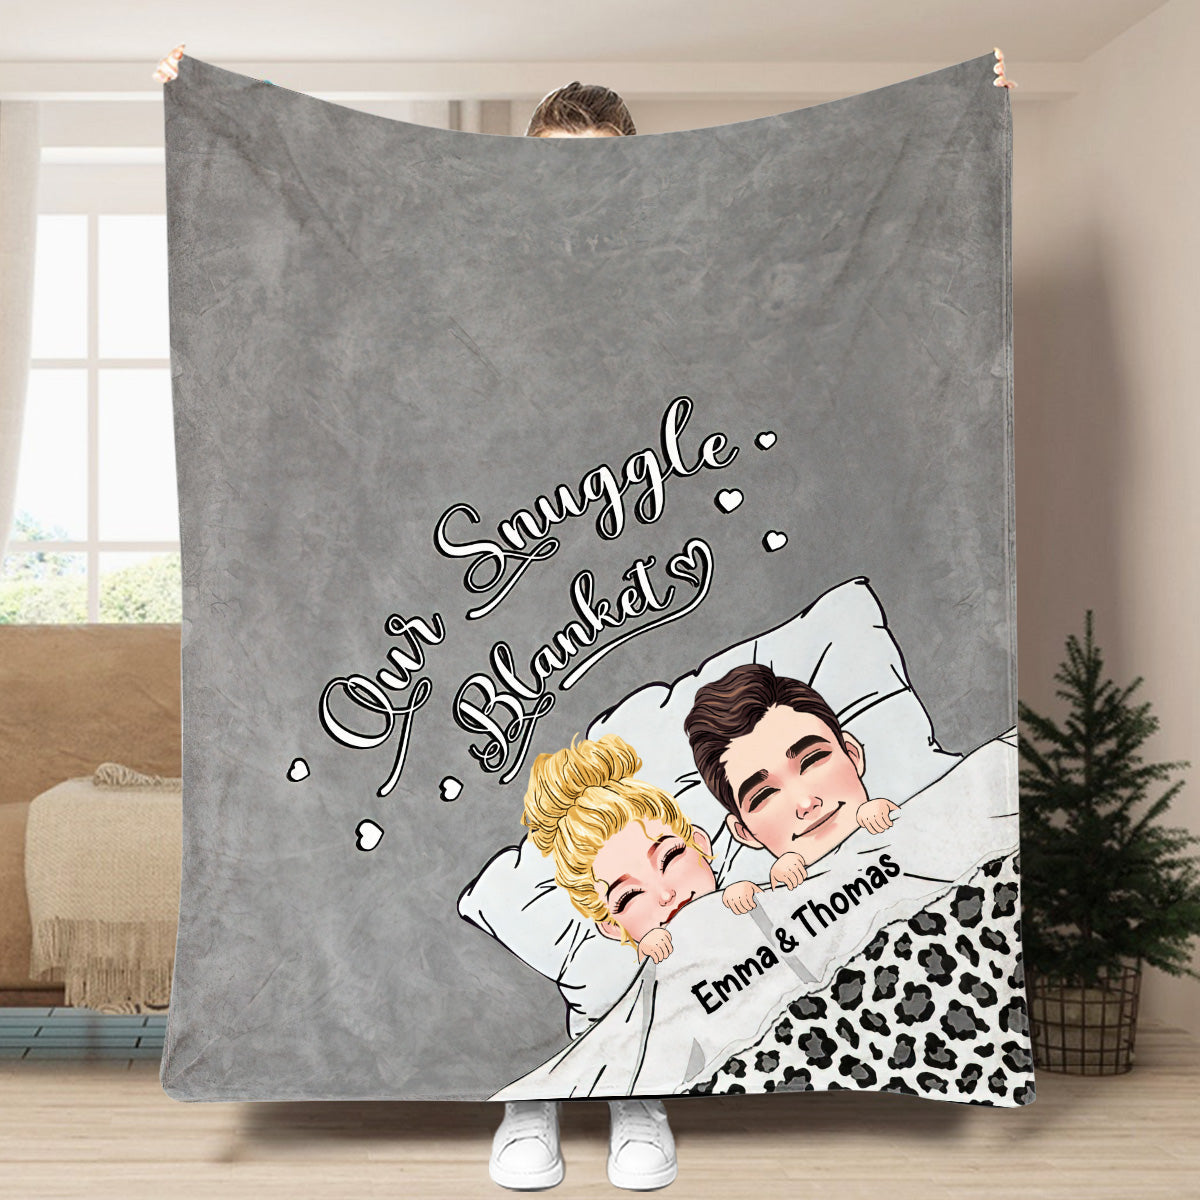 Our Snuggle Blanket - Personalized Couple Blanket